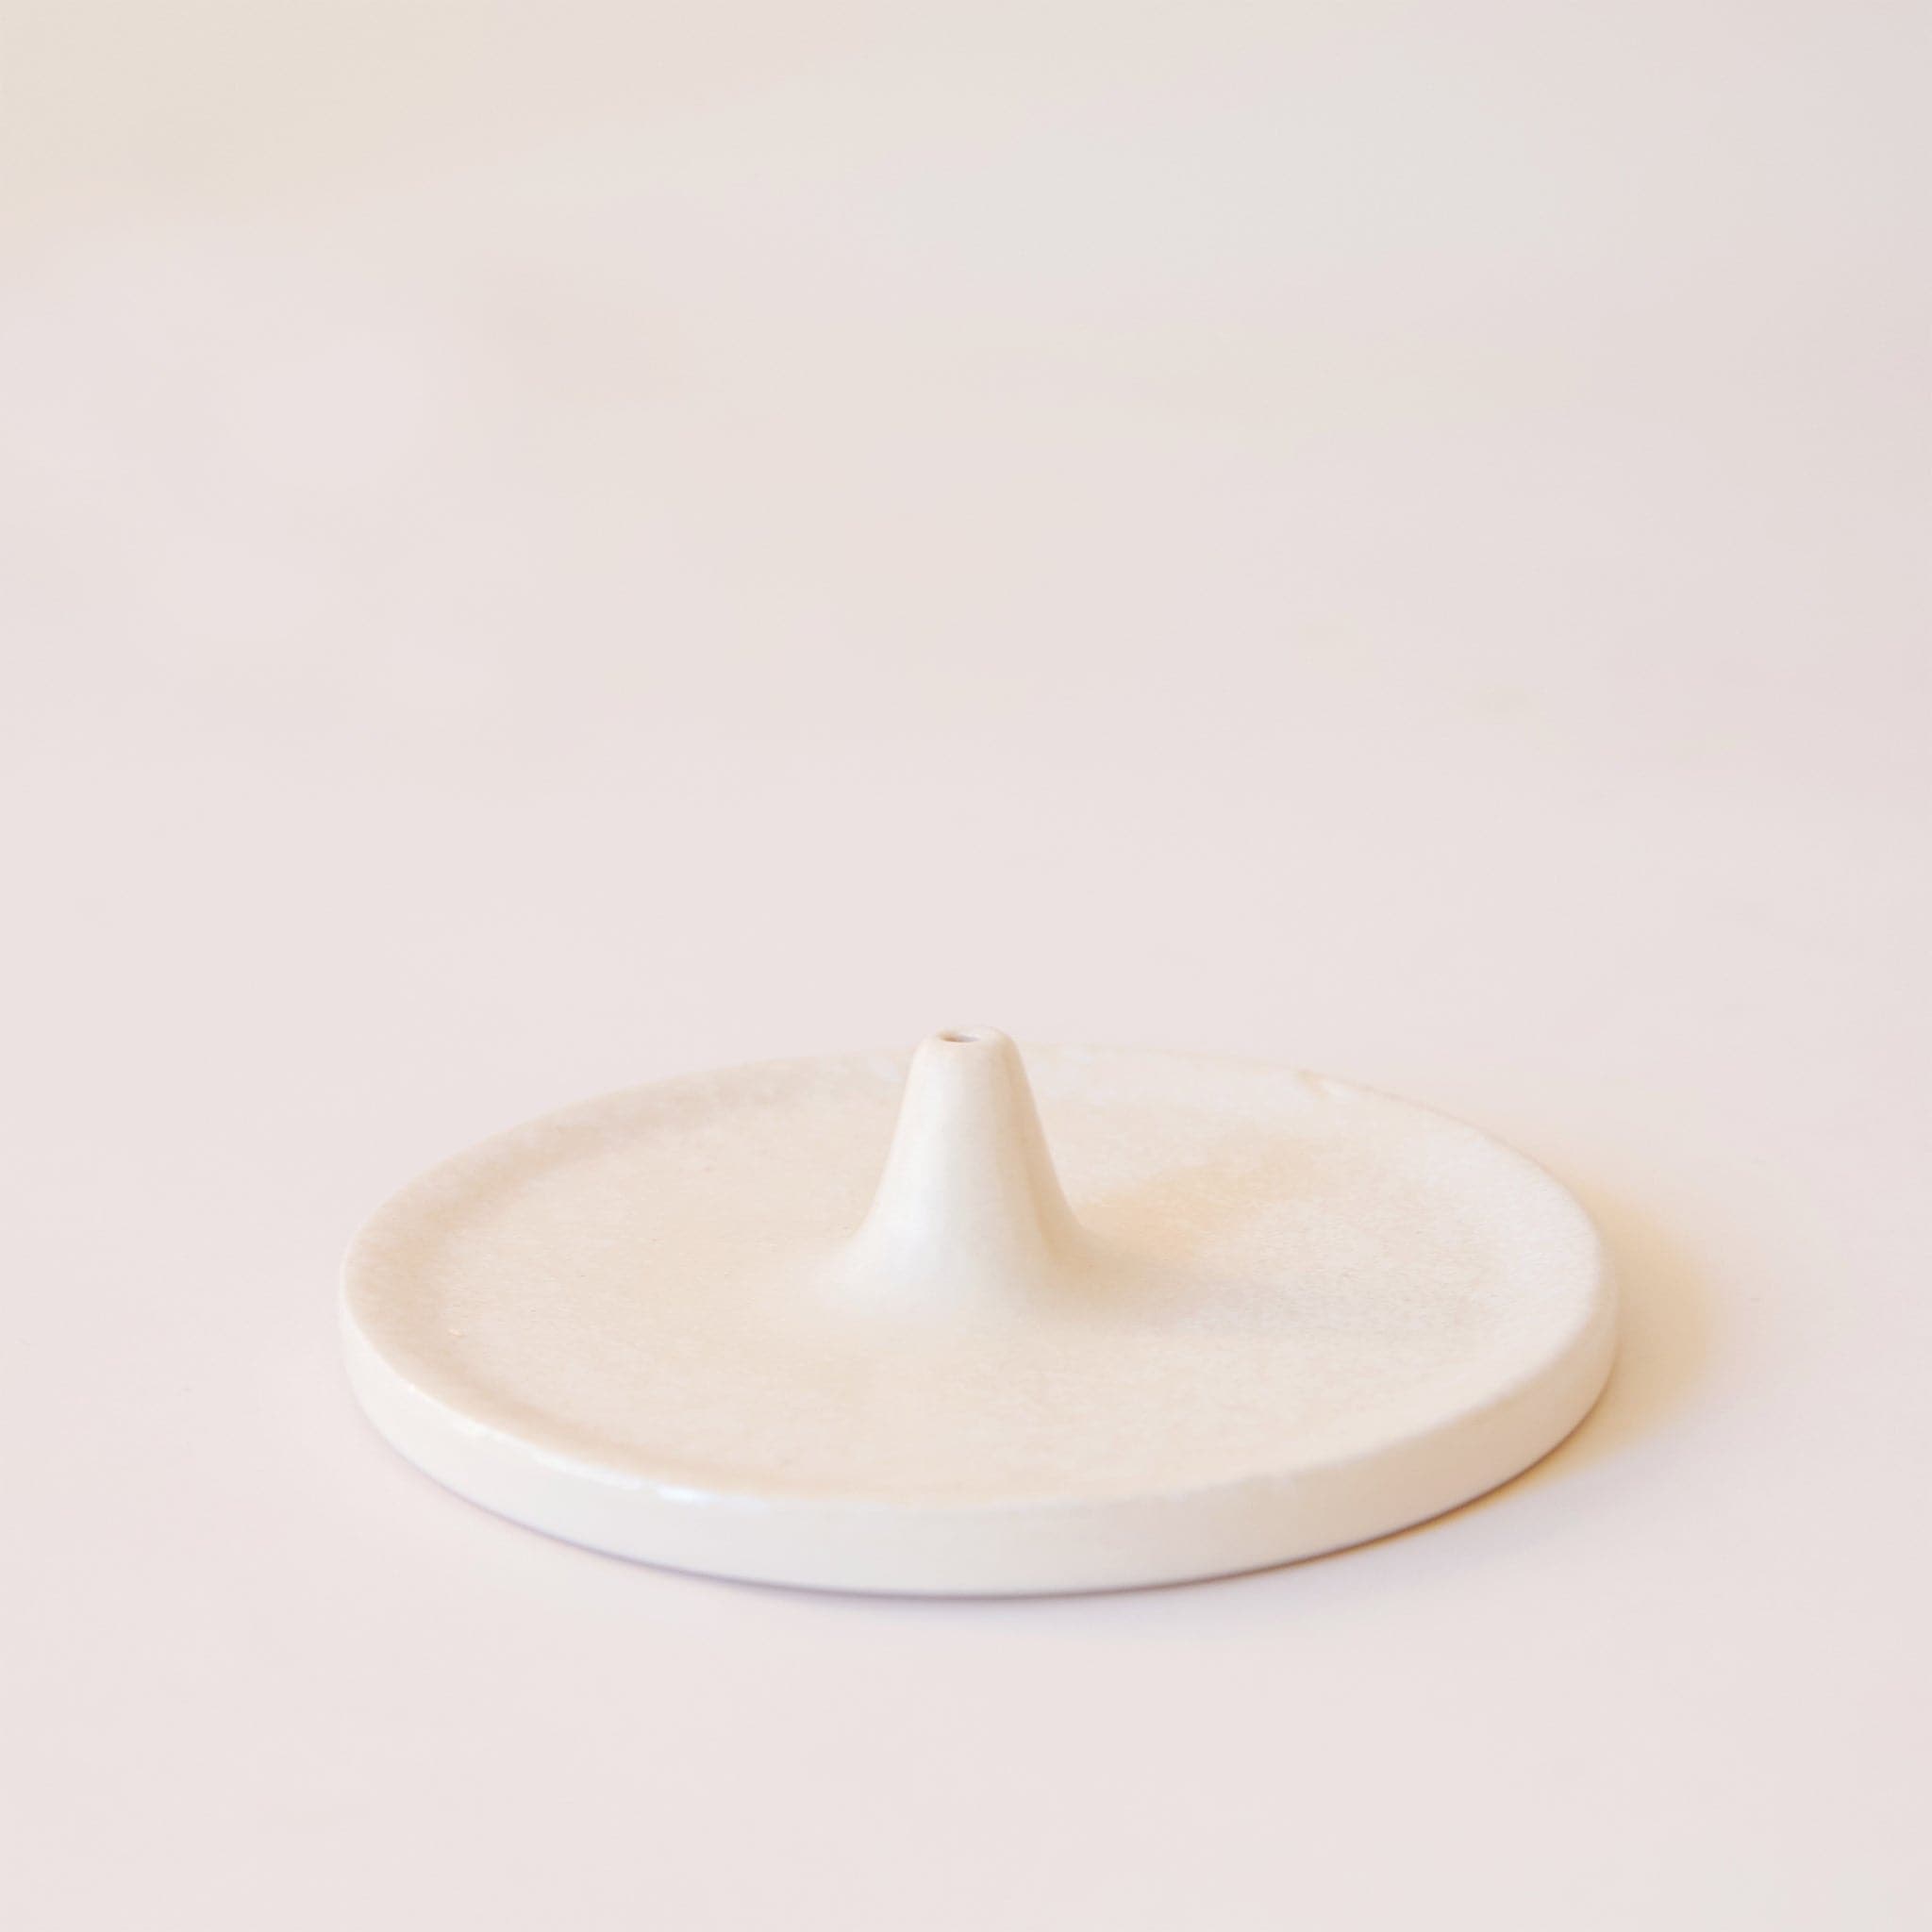 A white incense holder that has a circular shape with a point in the center that is raised with a hole to place your incense in.